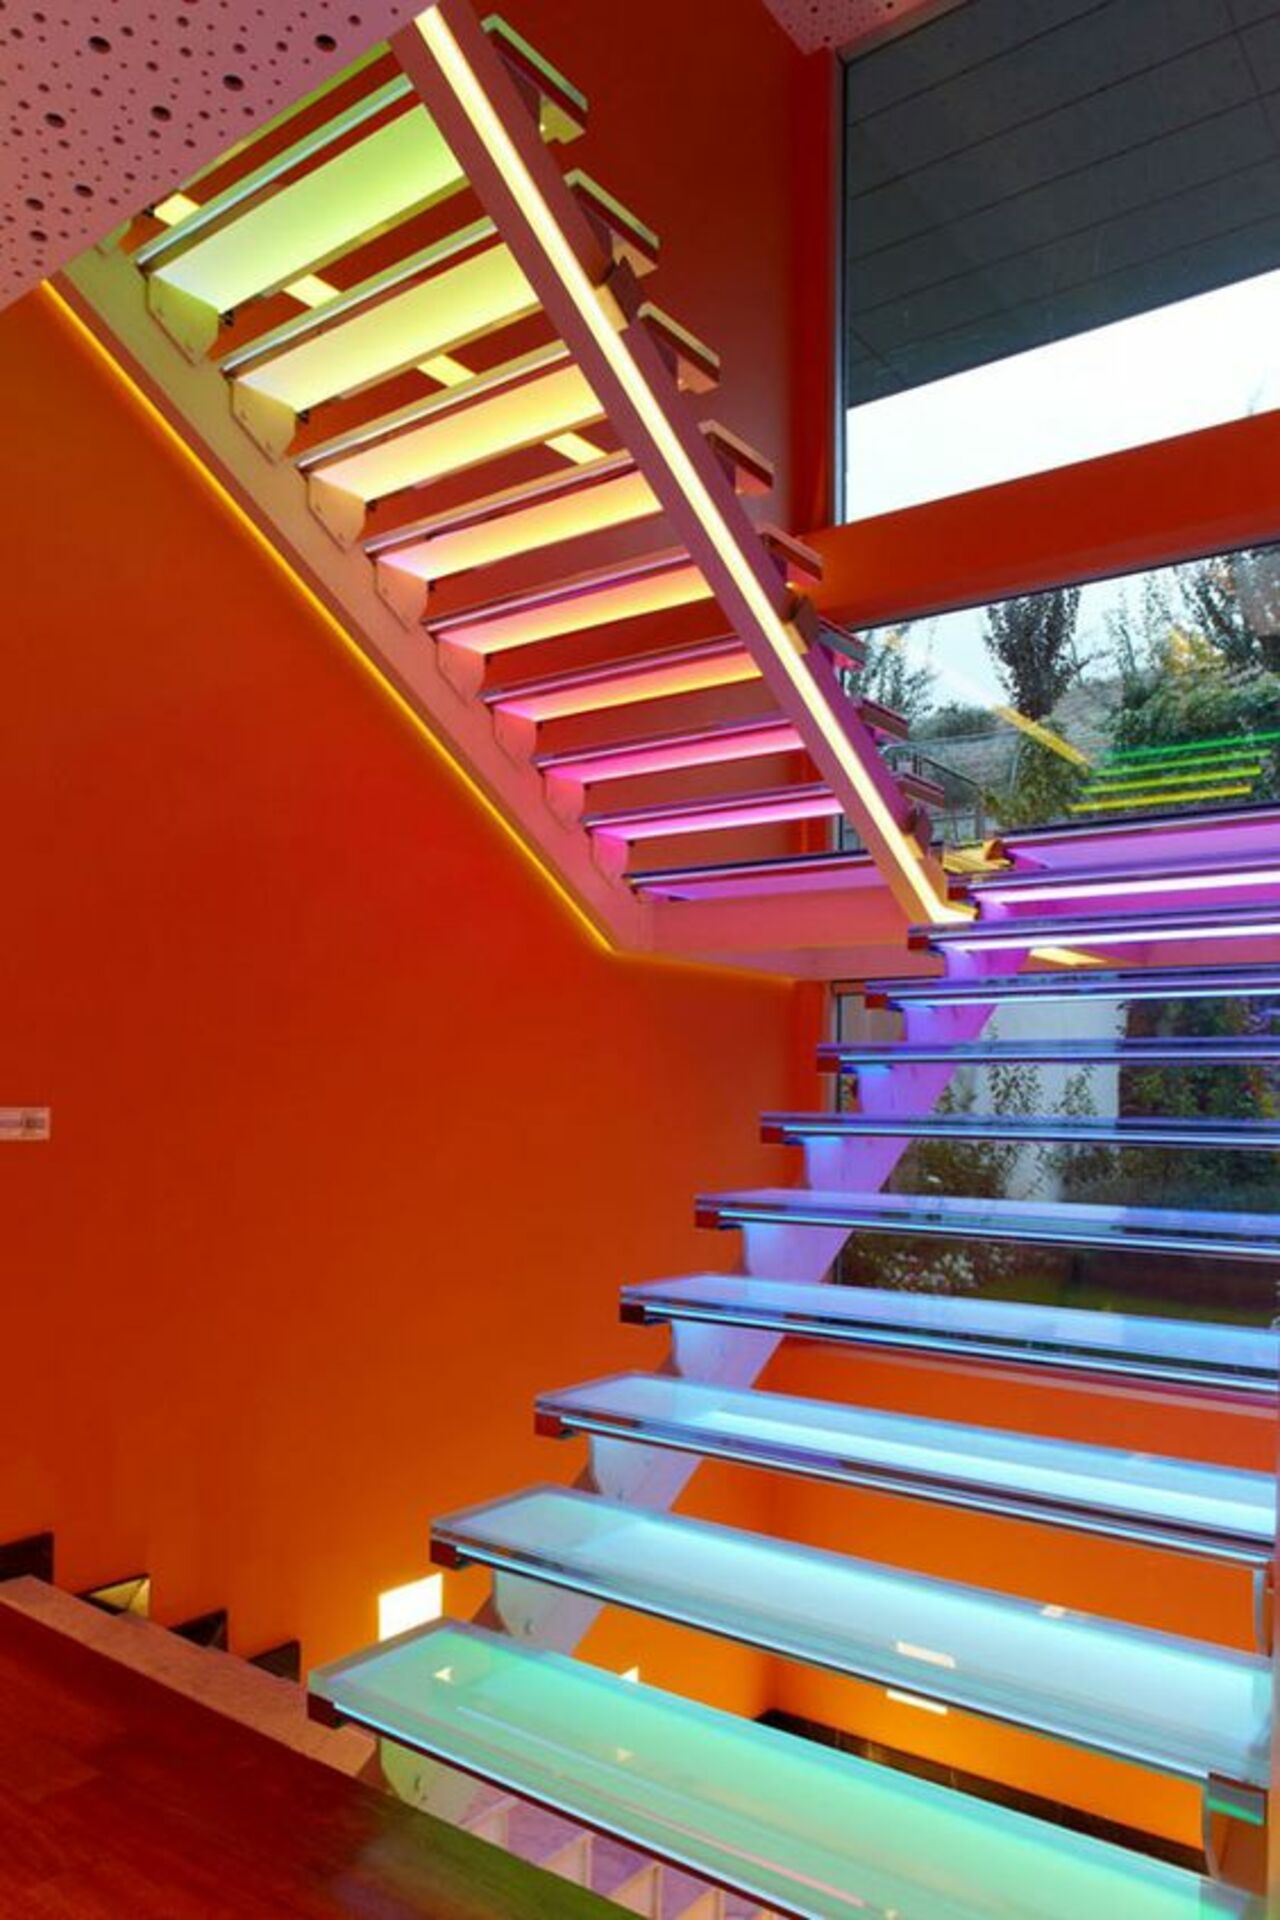 #Staircase Saturday -- Colorful stairs for a colorful home! The Orange House: http://ow.ly/Lgm9300MjL1 https://t.co/IiZie2IzVD